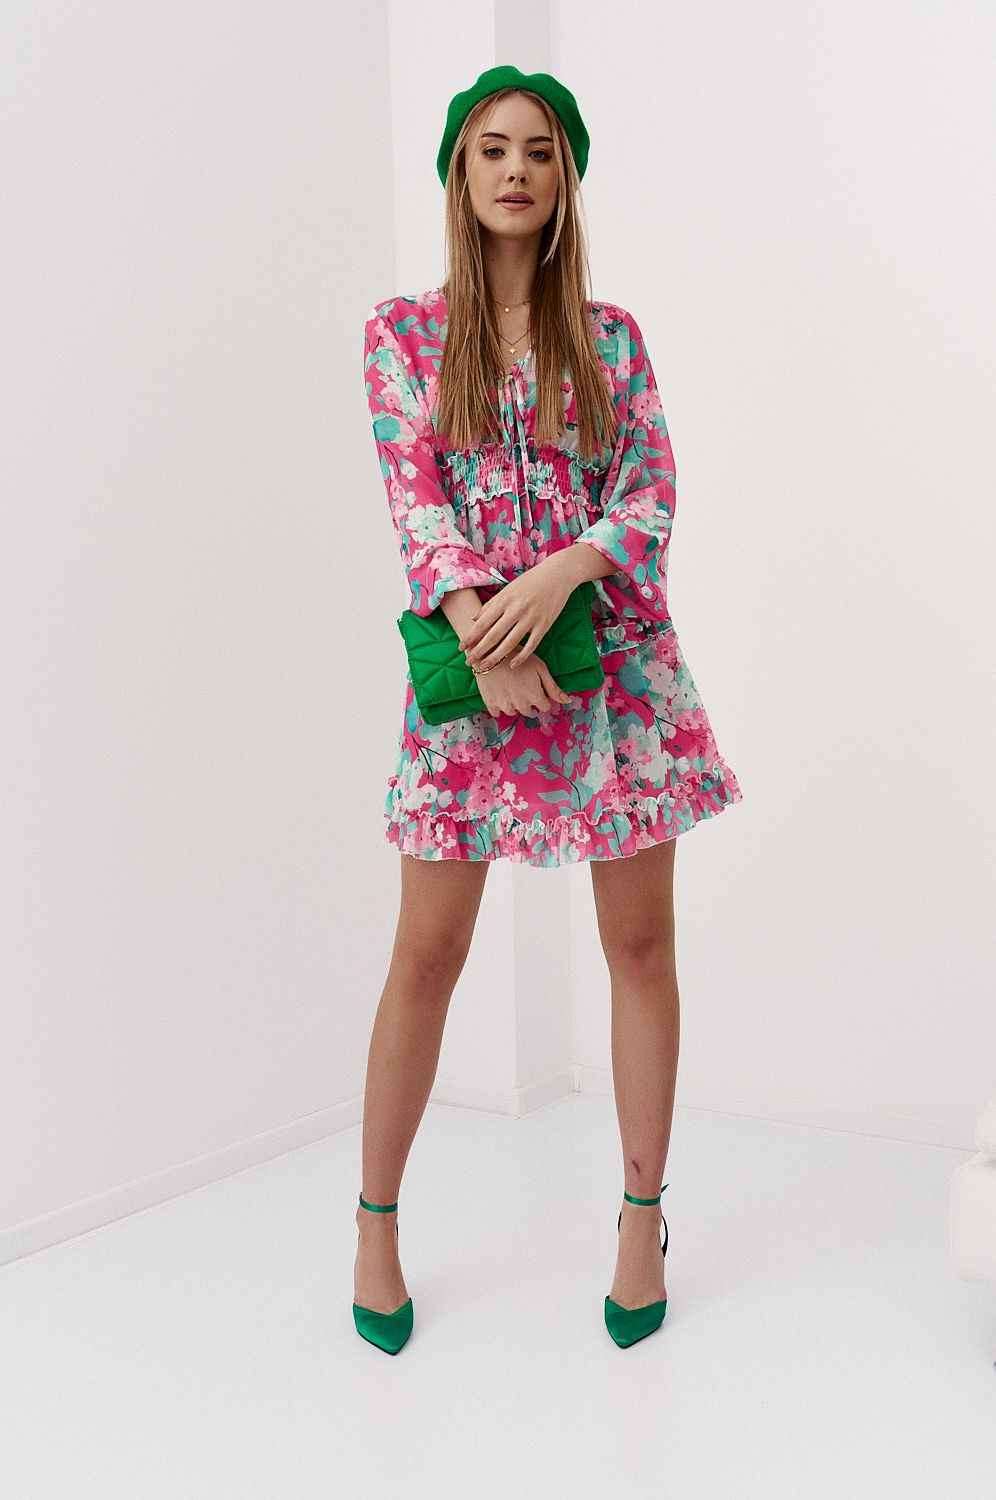 Airy chiffon dress with flowers in pink and green